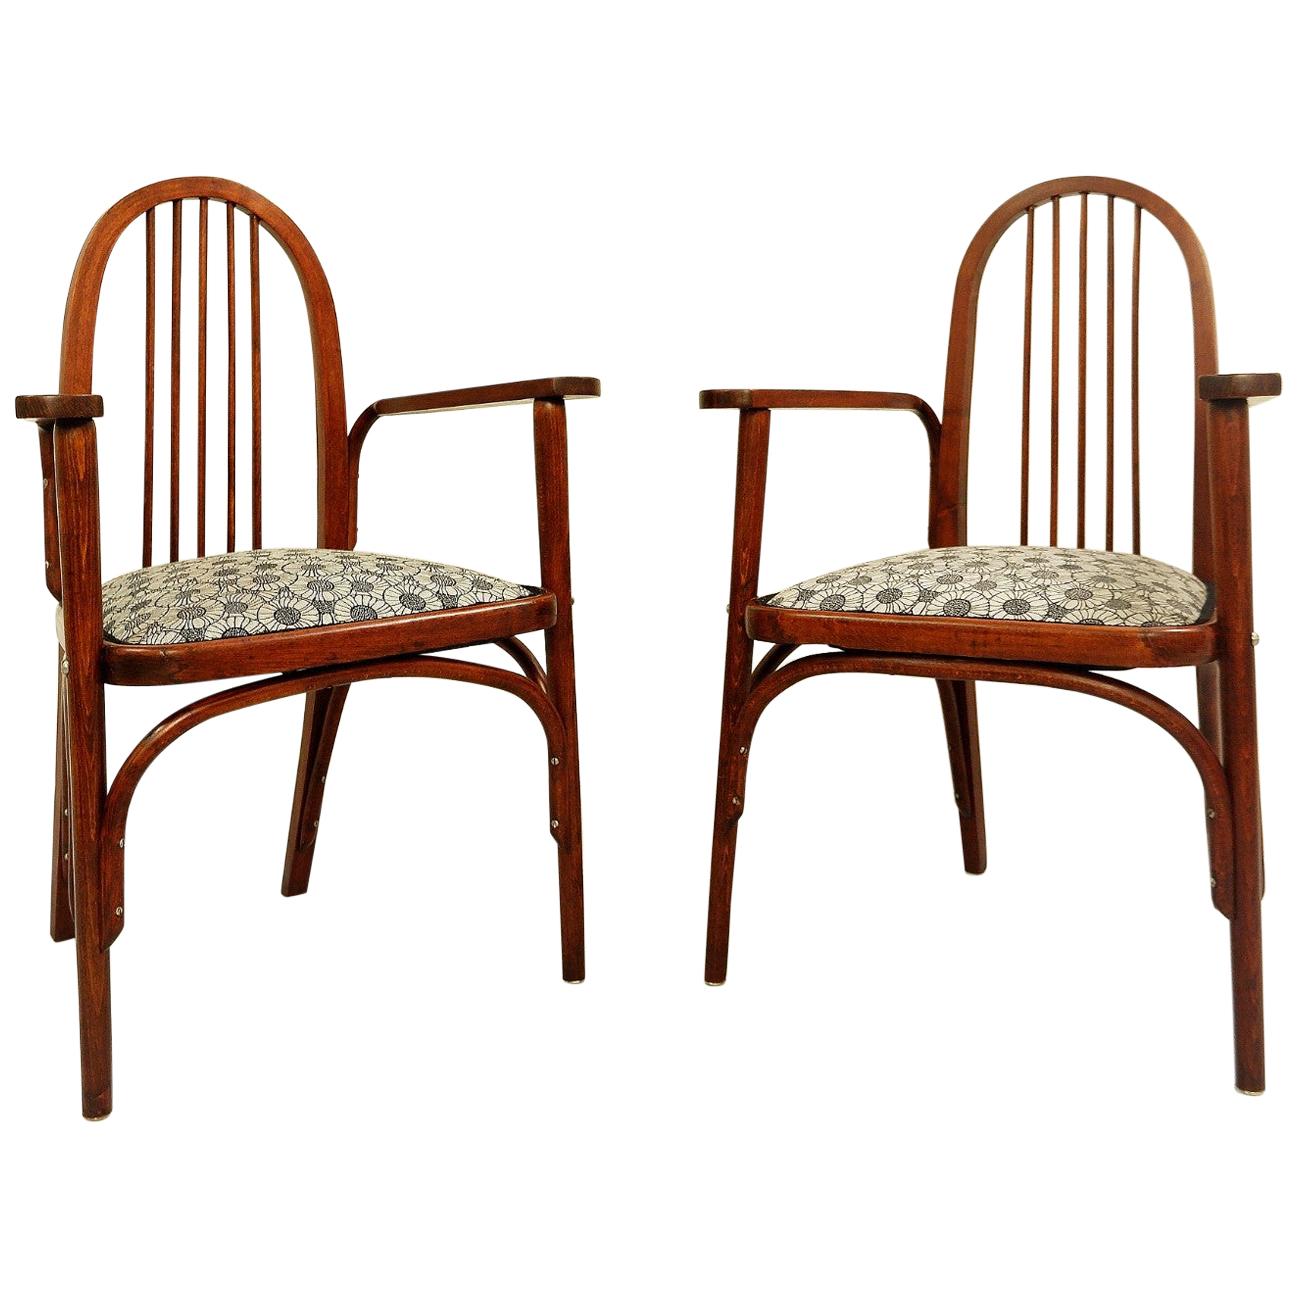 Pair of Josef Hoffmann for Thonet Armchairs, New Upholstery by Backhausen Fabri